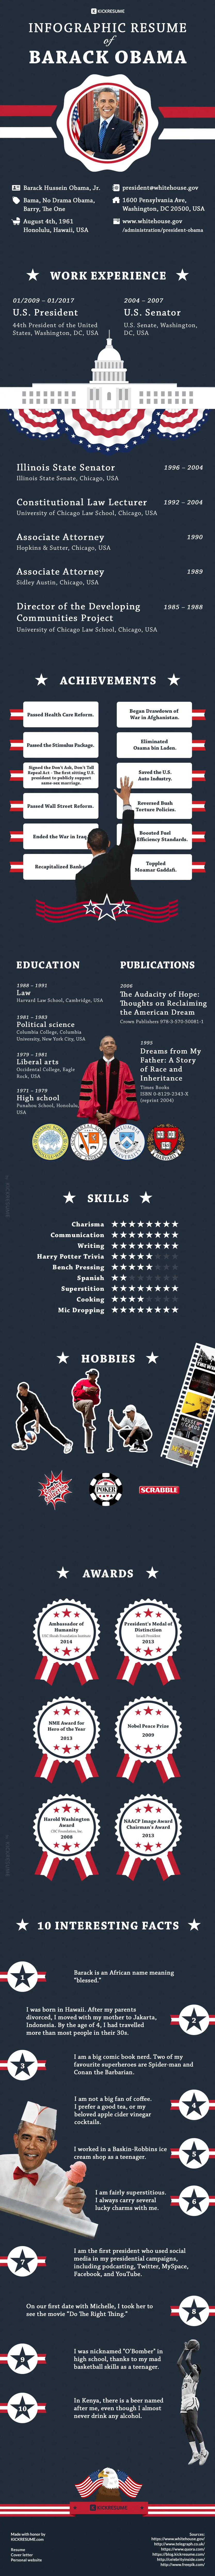 Infographic resume of Barack Obama. Would you hire him?